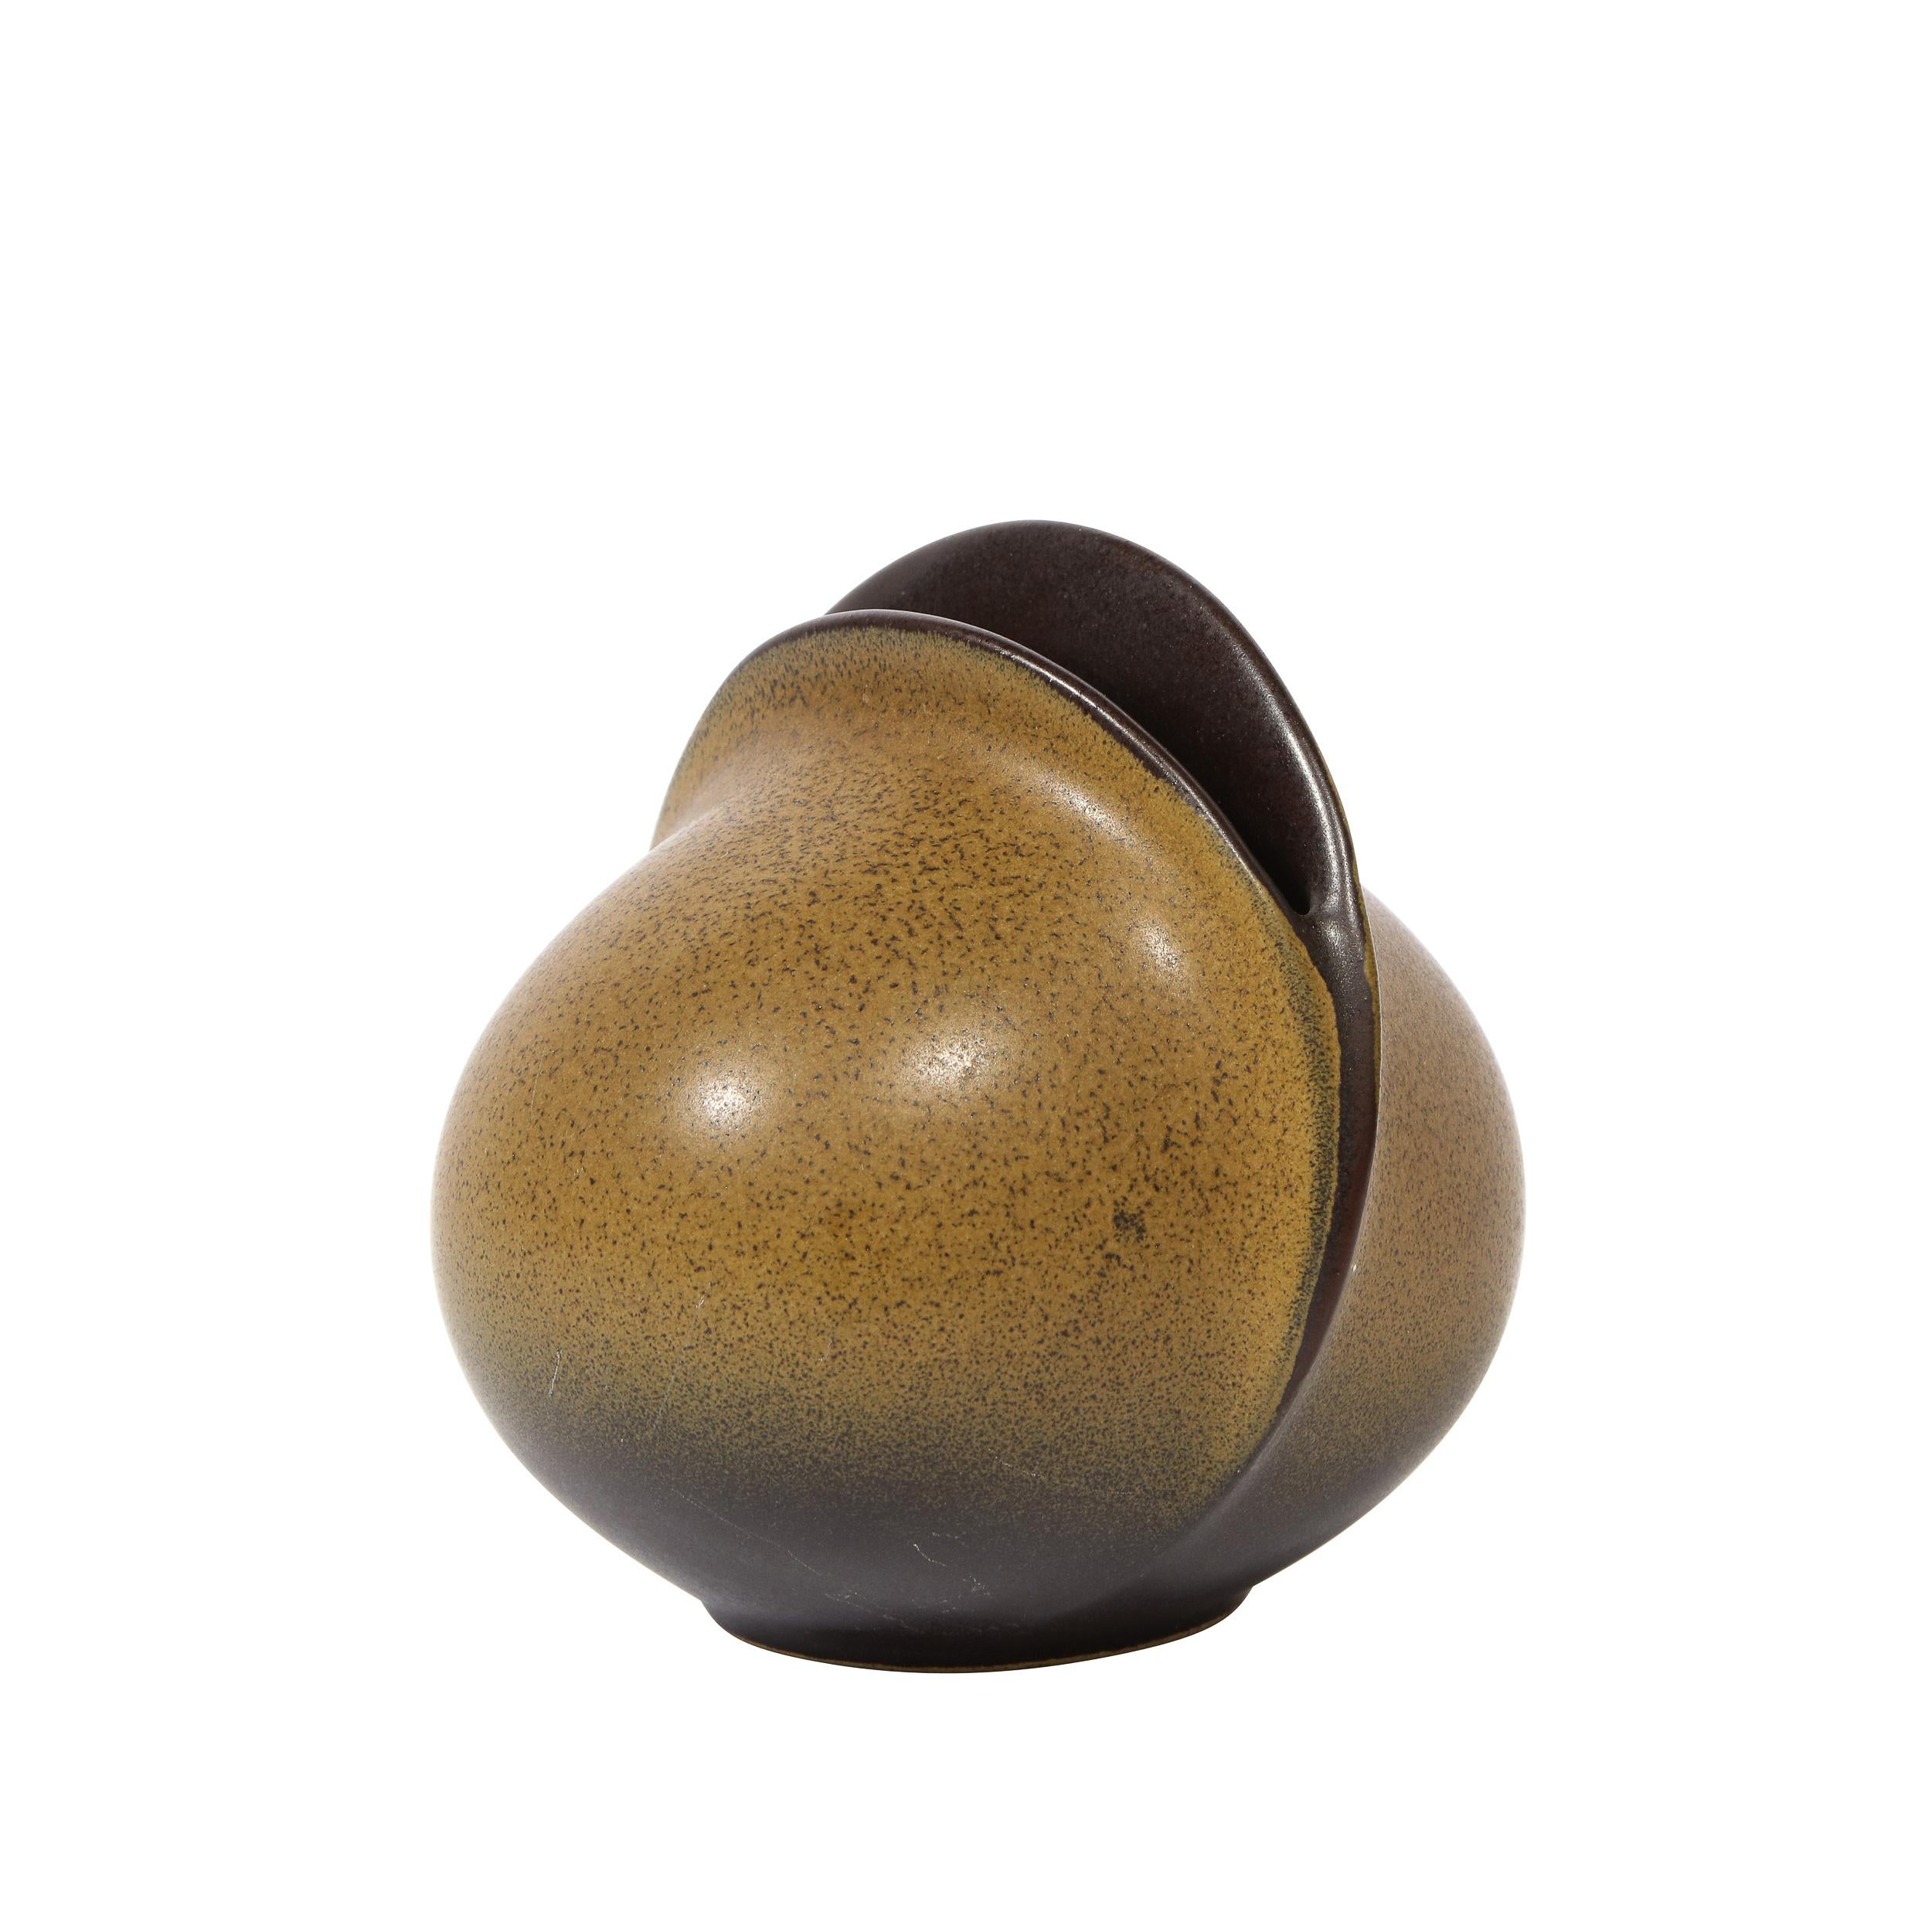 Mid-20th Century Mid-Century Modern Sculptural Spherical Vase with Ovoid Opening by Rosenthal